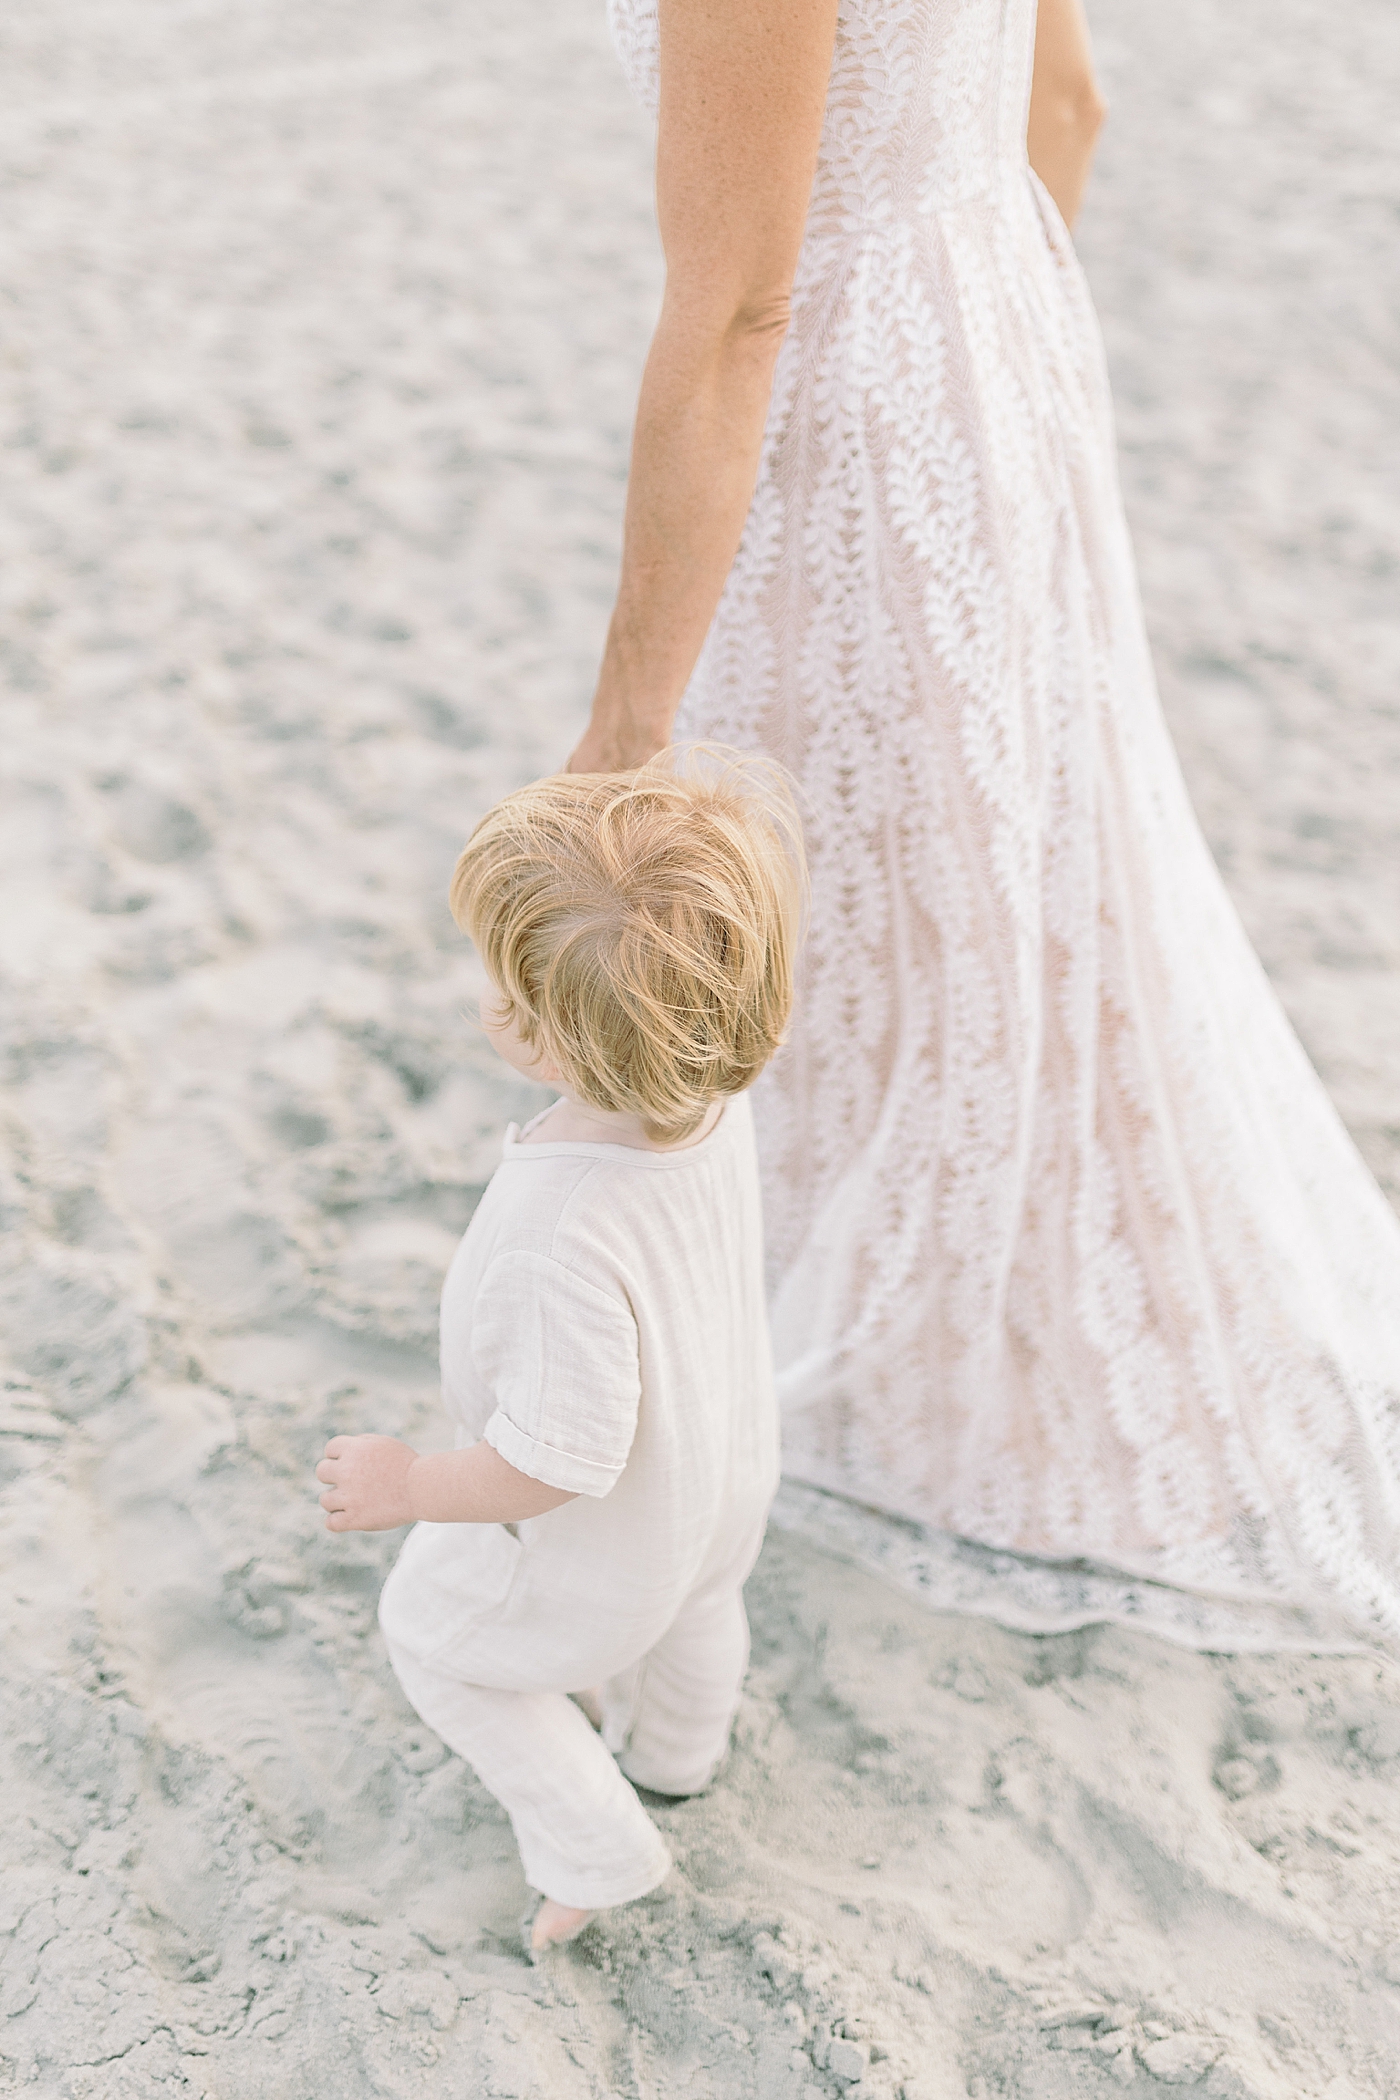 Toddler boy in white holding moms hand during fall family session at beach | Photo by Caitlyn Motycka Photography